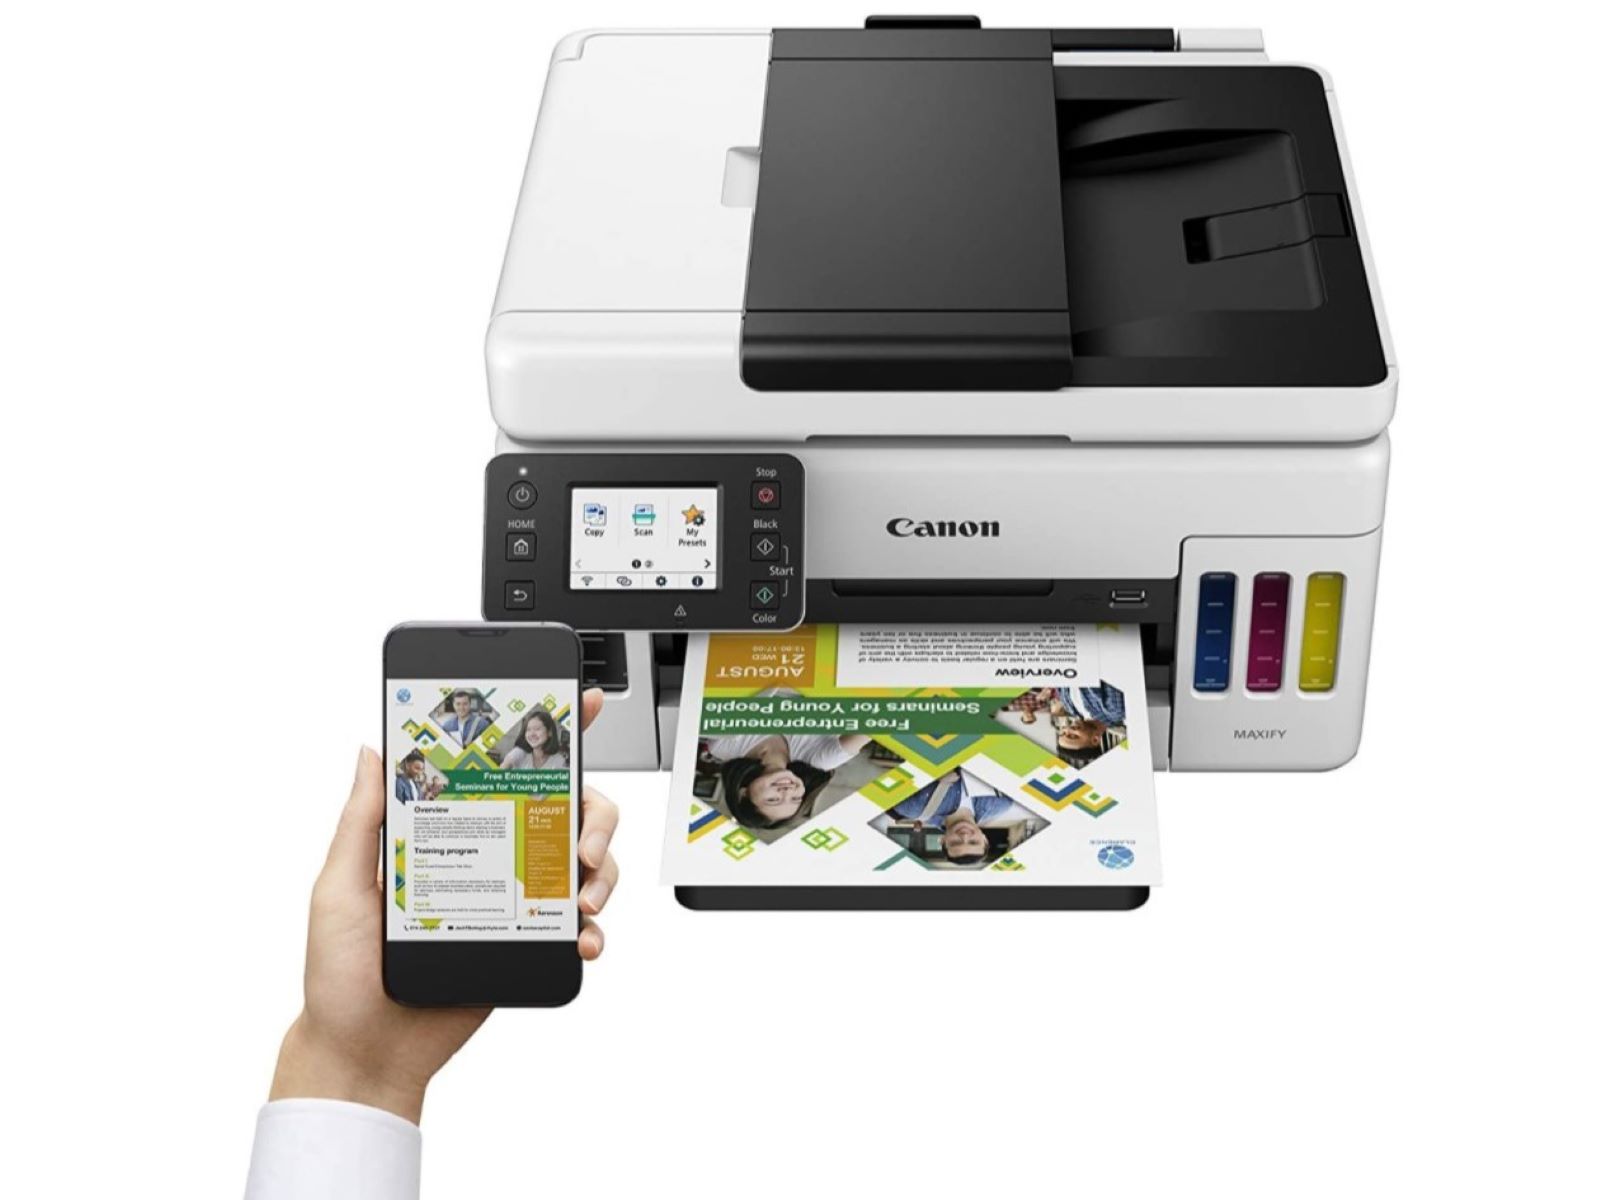 wireless-printing-to-canon-printers-mobile-device-guide